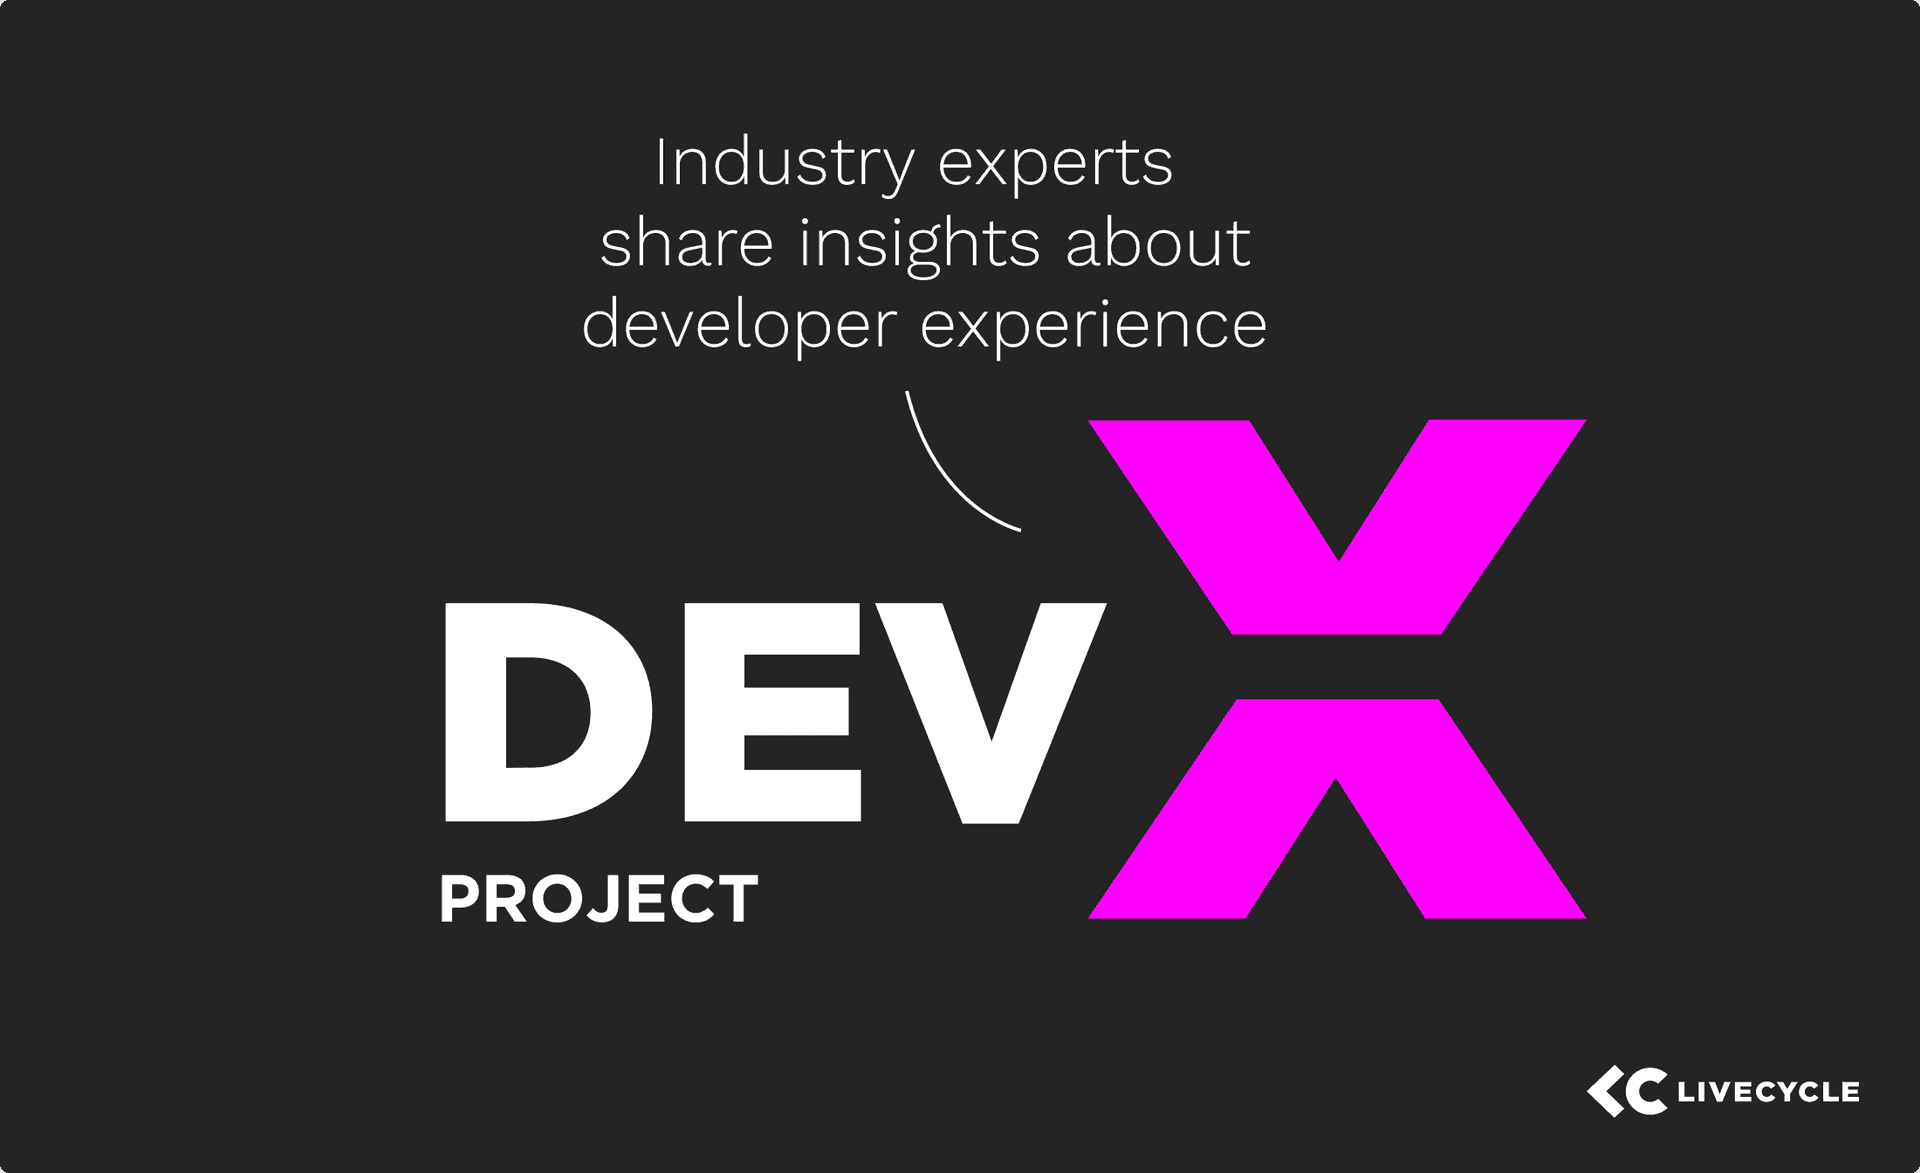 Introducing "The Dev-X Project"